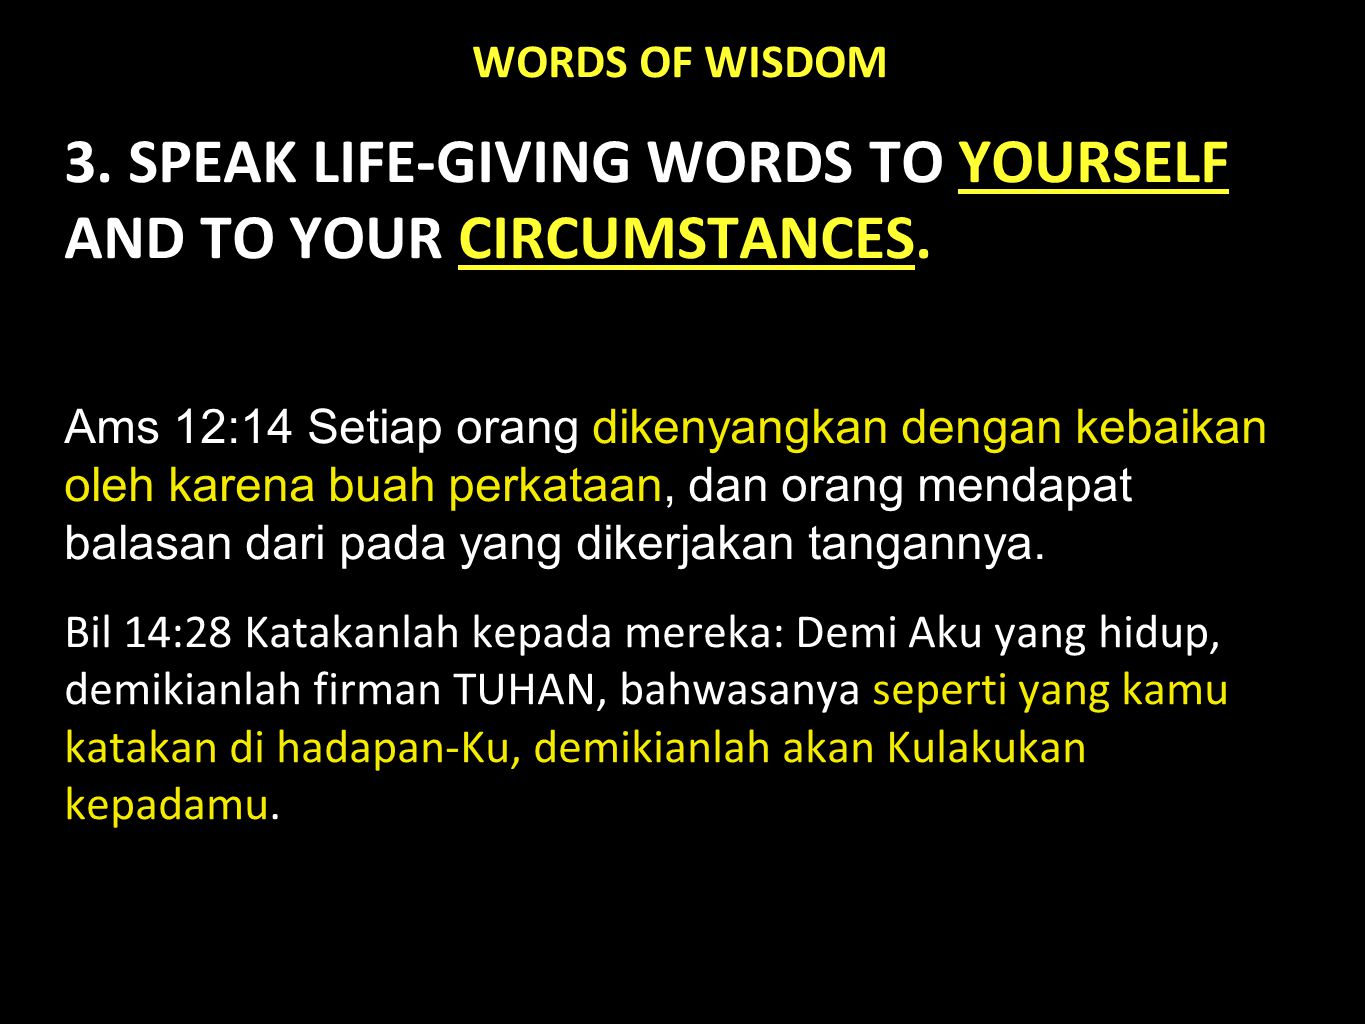 WORDS OF WISDOM 3. SPEAK LIFE-GIVING WORDS TO YOURSELF AND TO YOUR CIRCUMSTANCES.